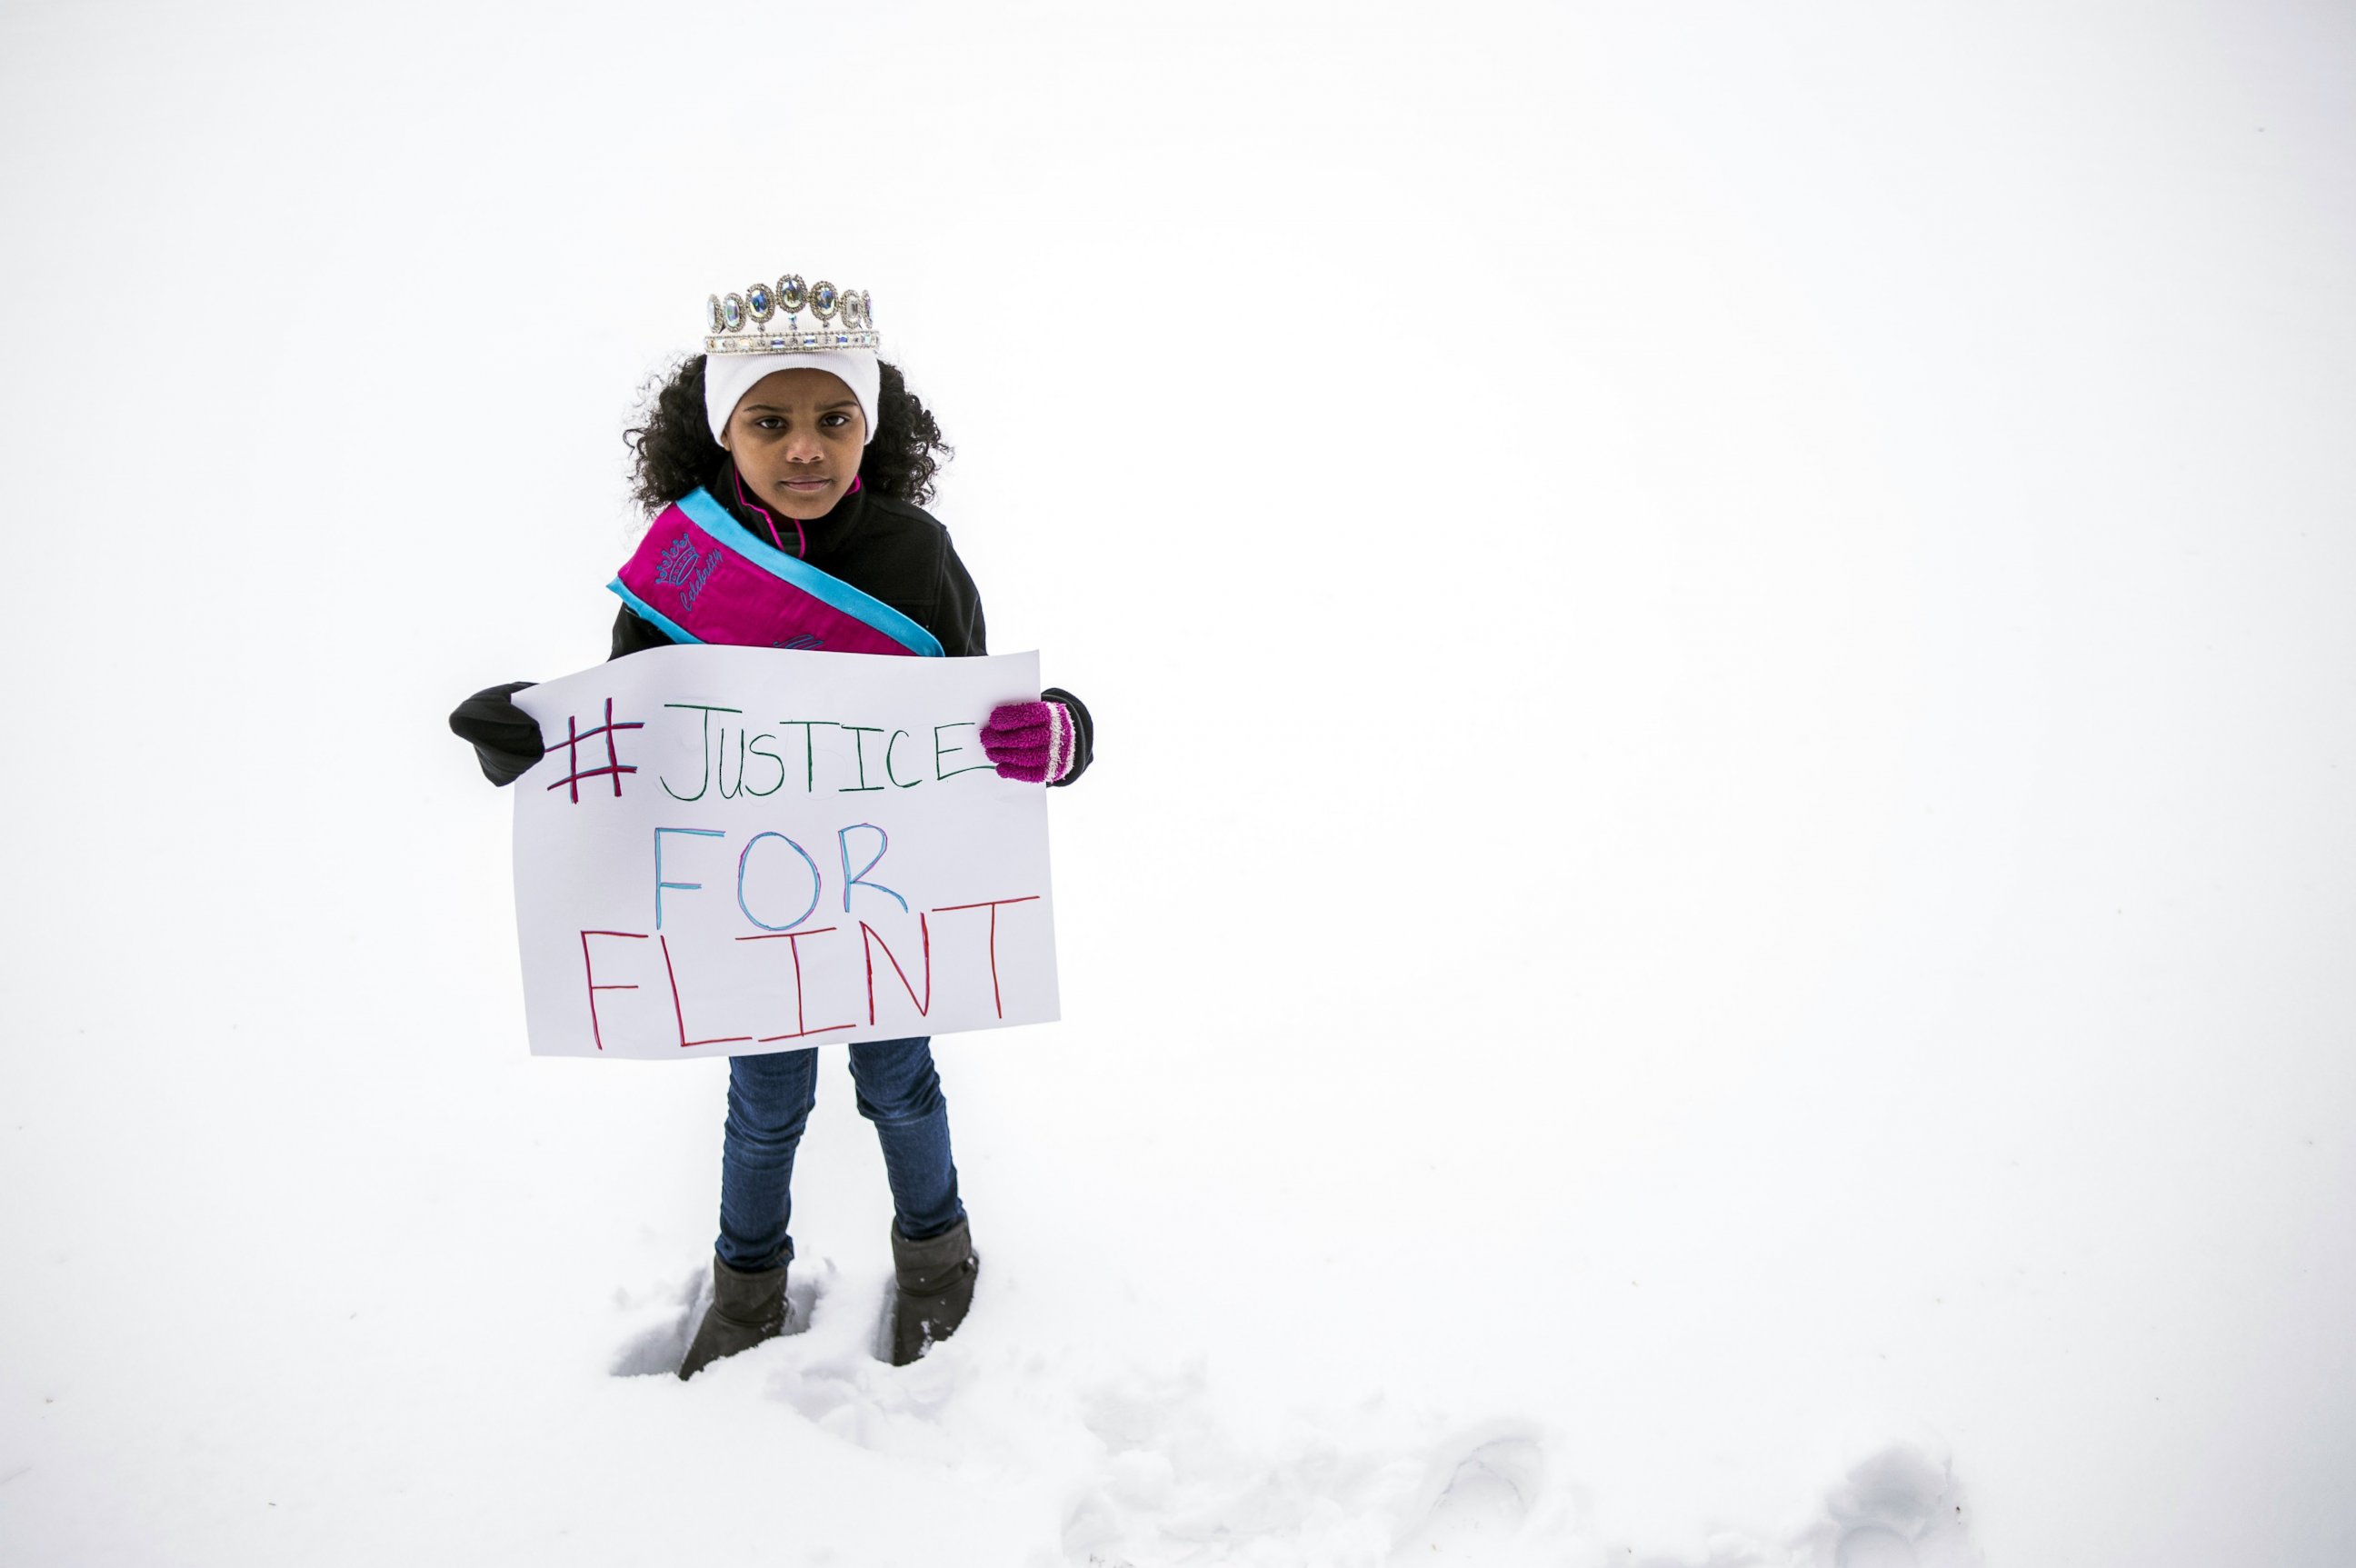 PHOTO: In a March 6, 2016 photo, Mari Copeny, 8, of Flint, Mich., stands with a protest sign during a #Justice4Flint rally at Wilson Park on University of Michigan-Flint's campus in Flint, Mich.